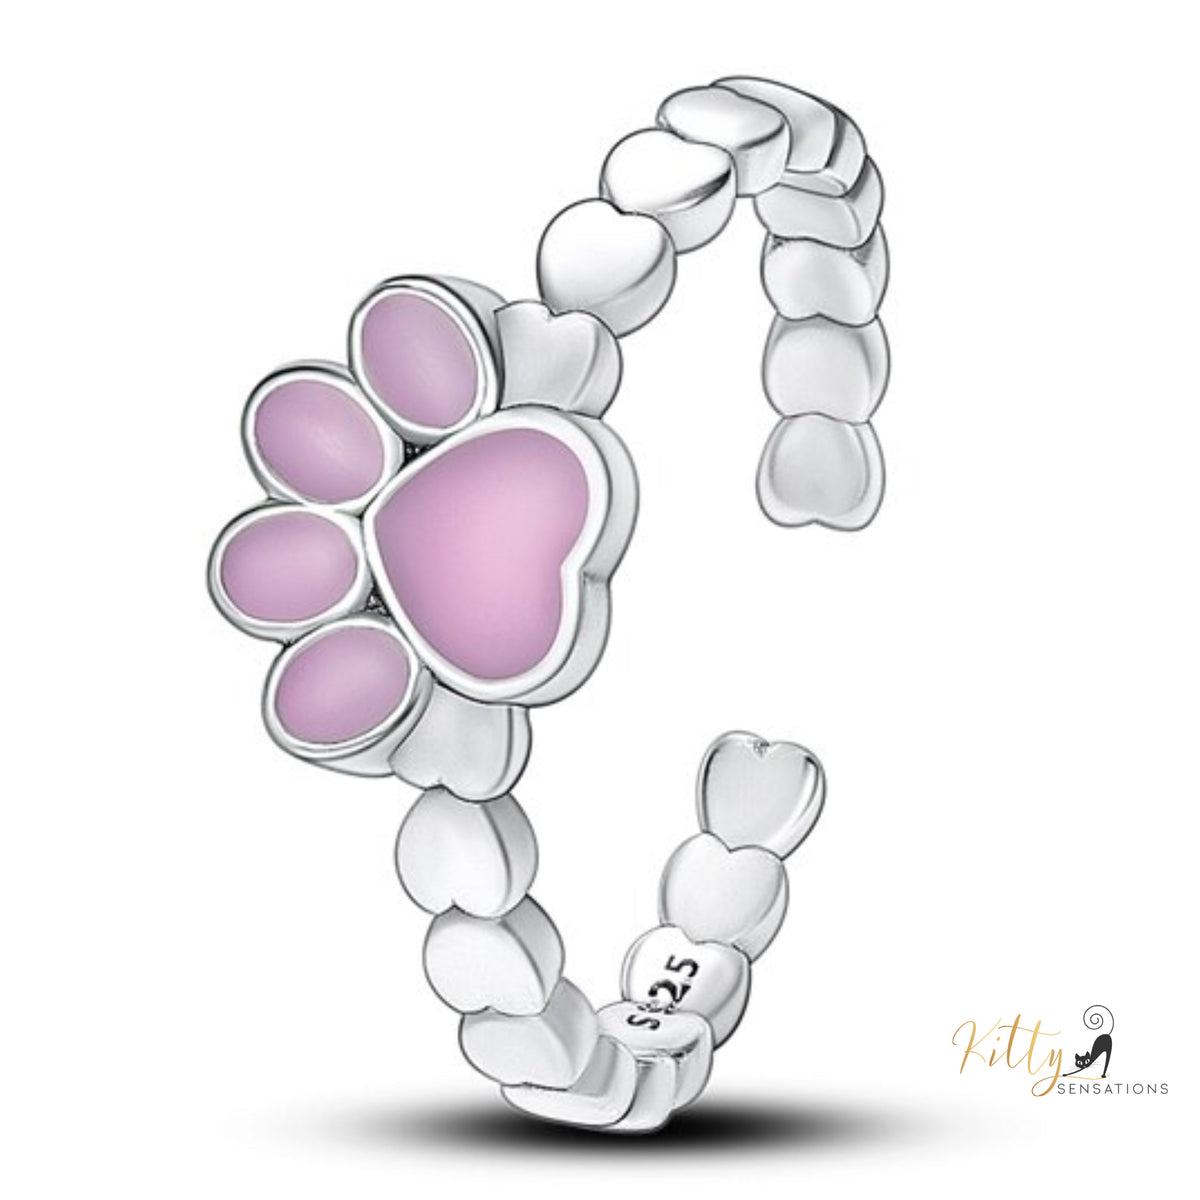 www.KittySensations.com: Heart Band Enameled Kitty Paw Ring in Solid 925 Sterling Silver - Adjustable Size ($24.80): https://www.kittysensations.com/products/heart-band-enameled-kitty-paw-ring-in-solid-925-sterling-silver-adjustable-size